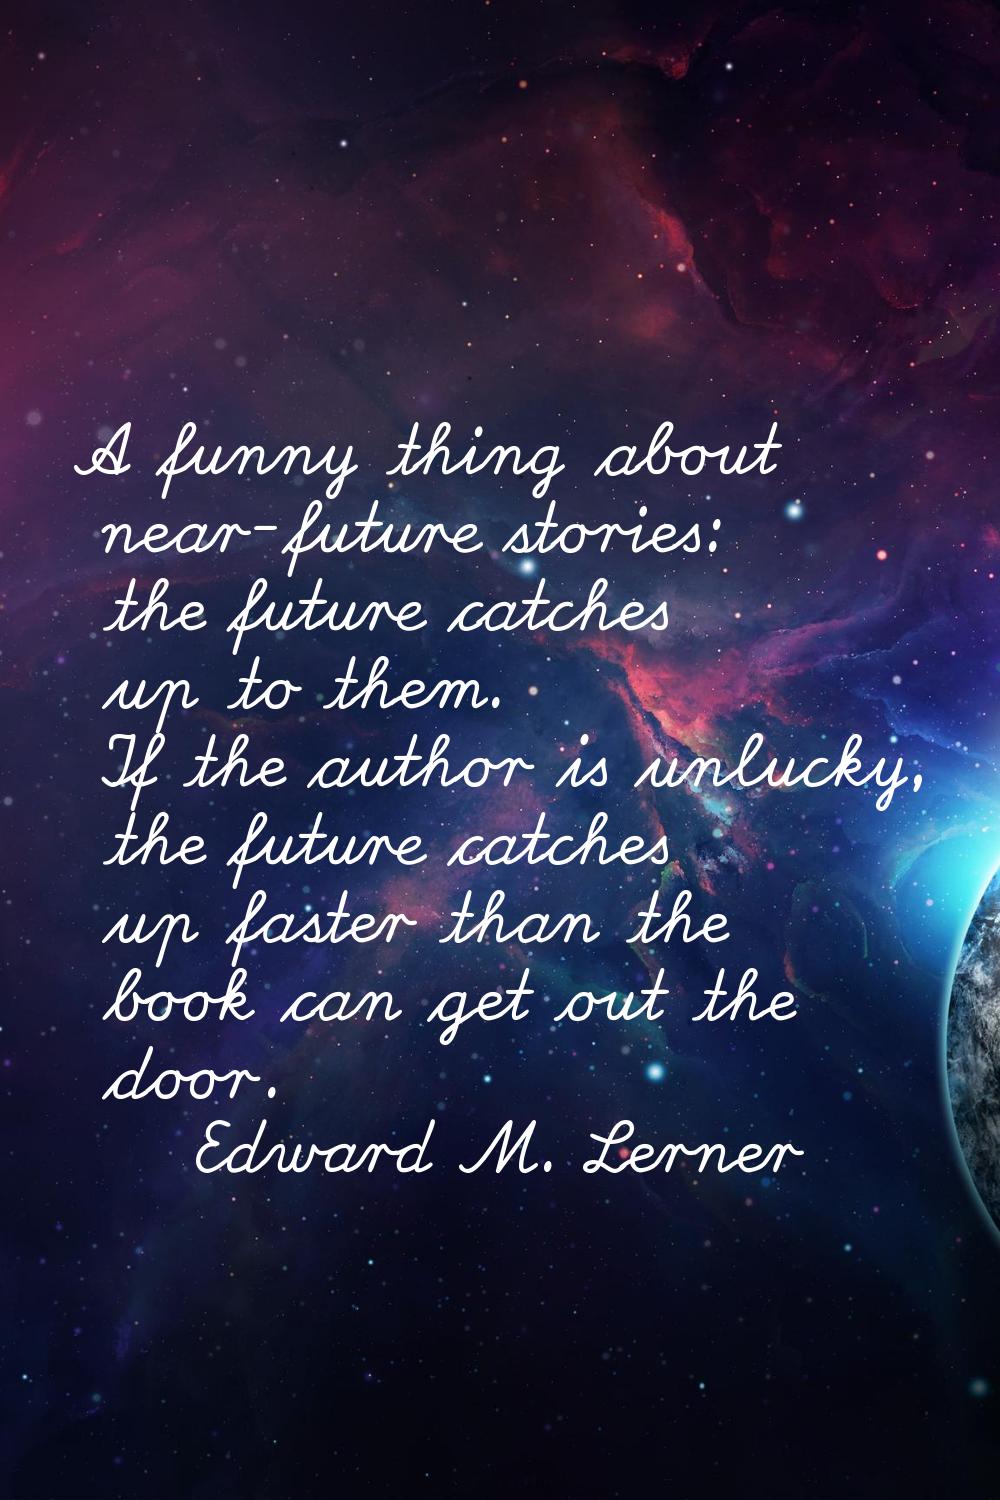 A funny thing about near-future stories: the future catches up to them. If the author is unlucky, t